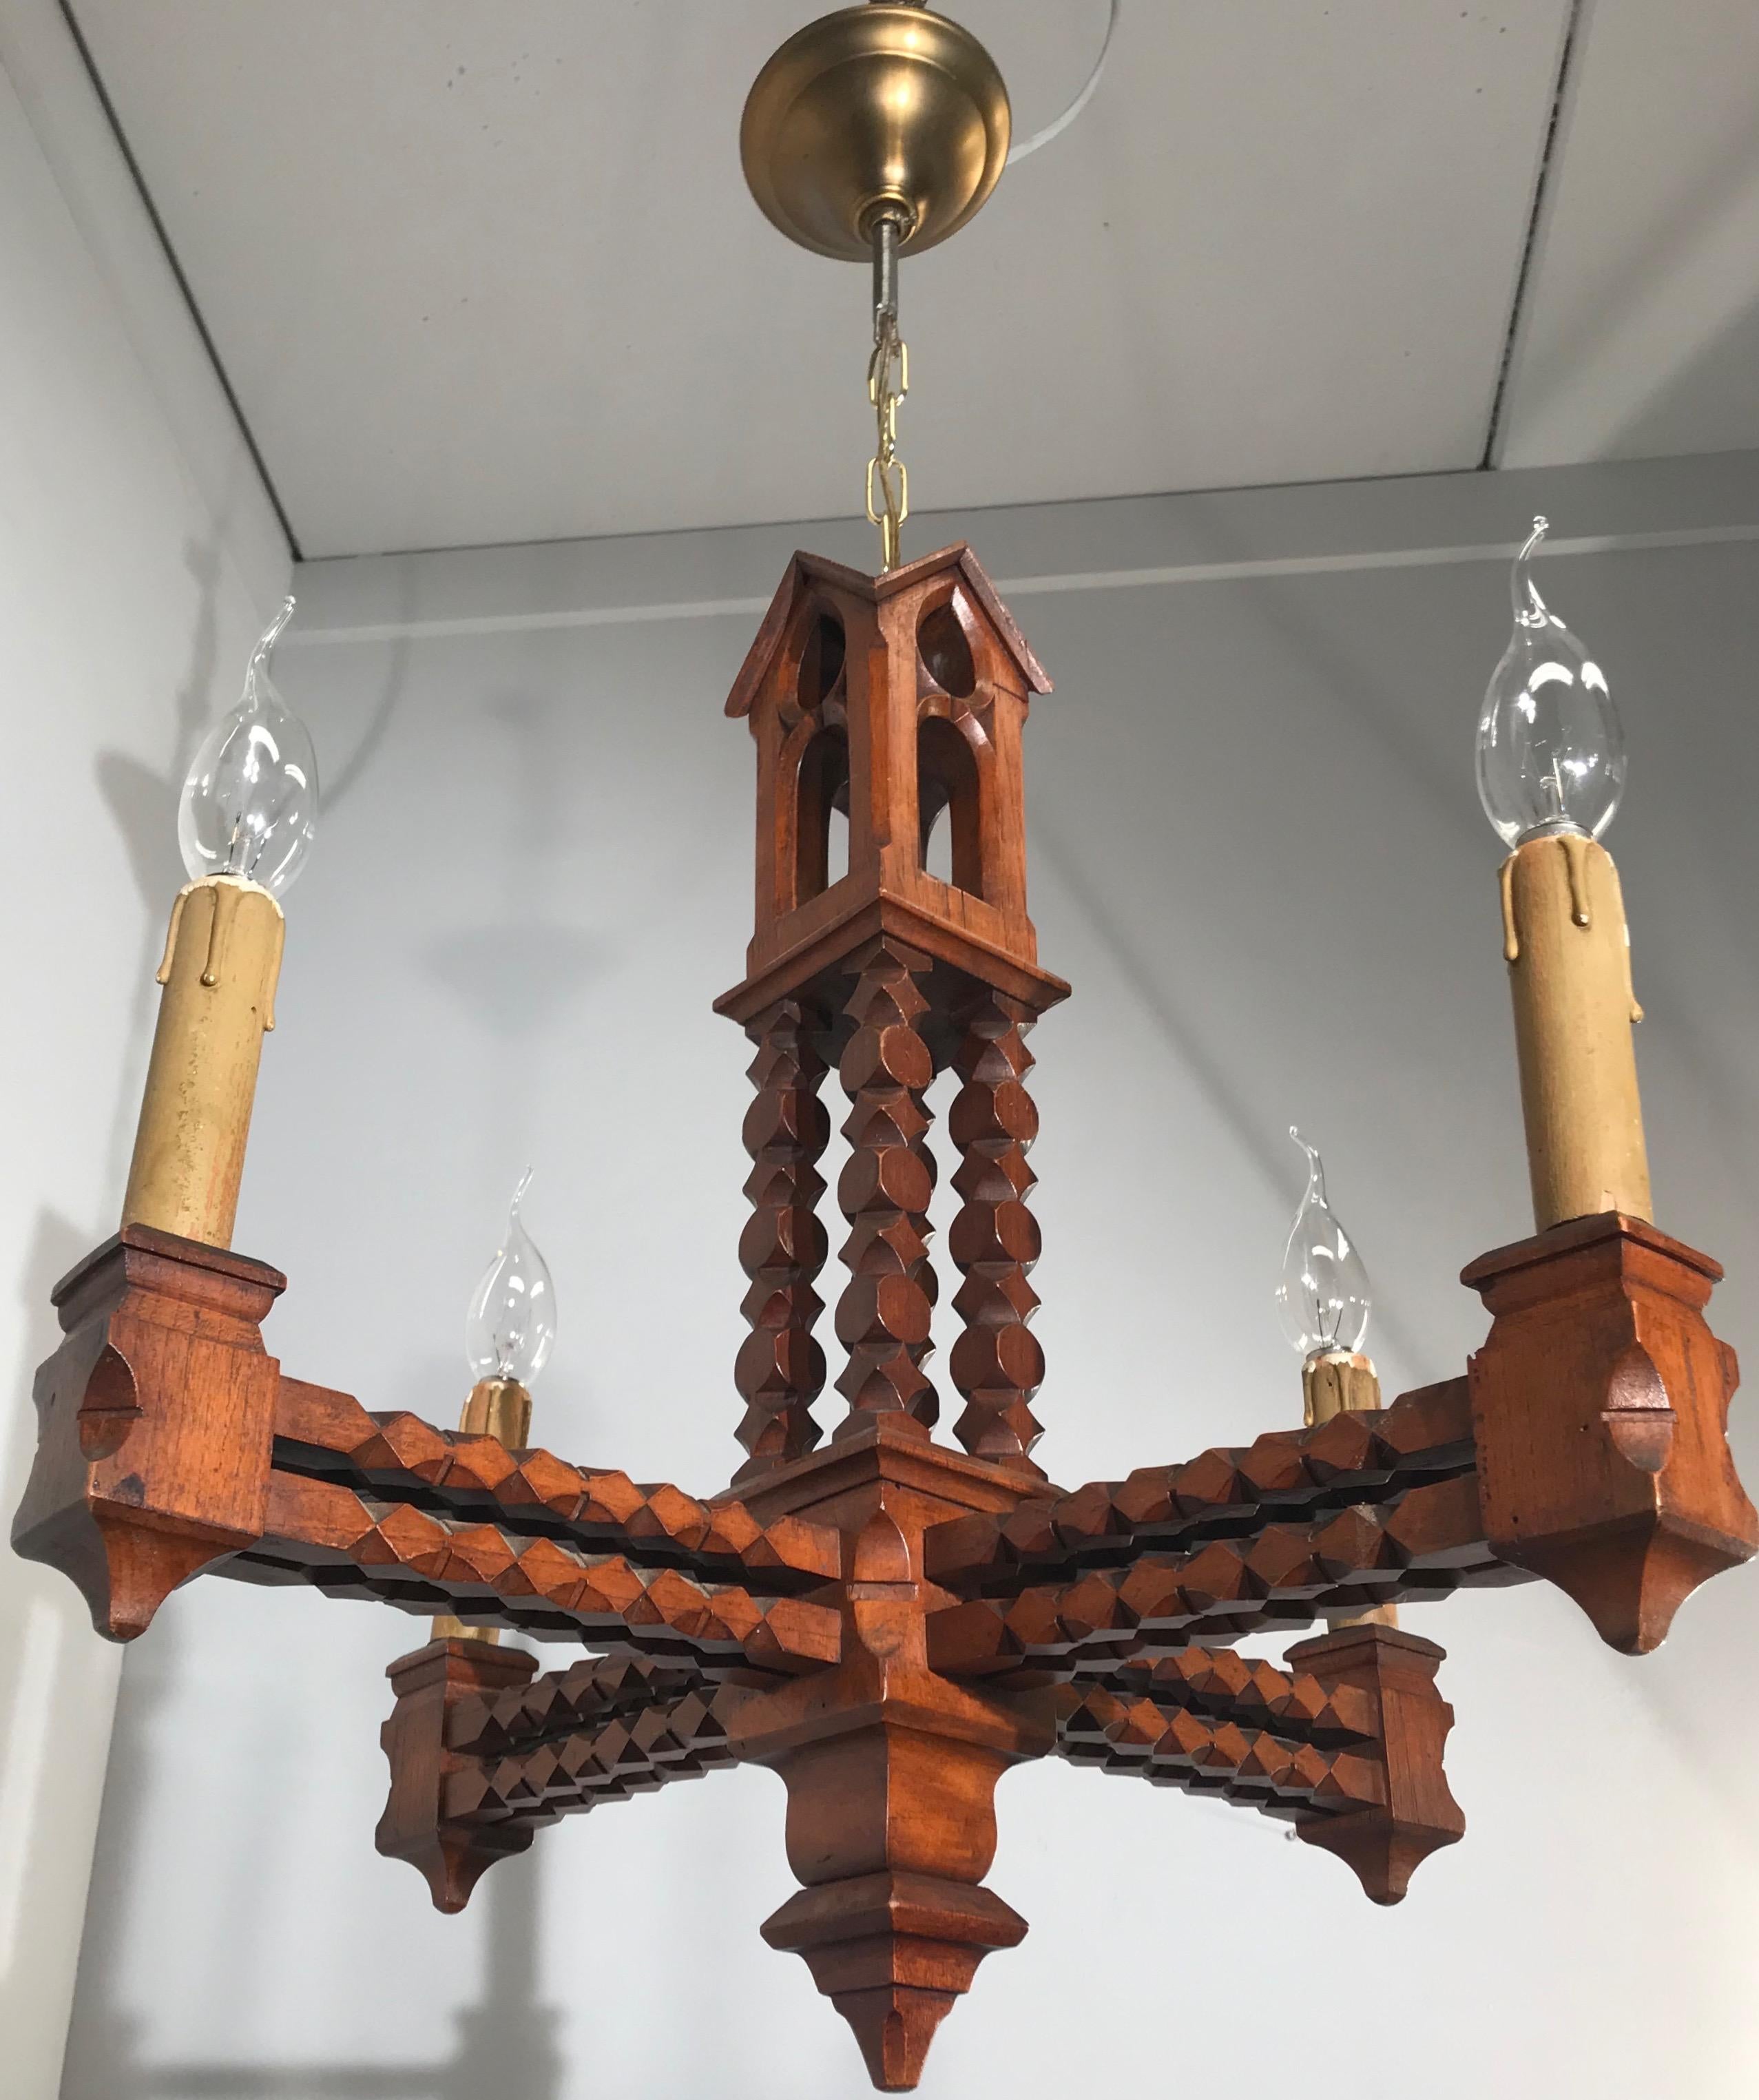 Hand-Carved Early 1900 Arts & Crafts Era Gothic Revival Pendant Light, Chandelier or Fixture